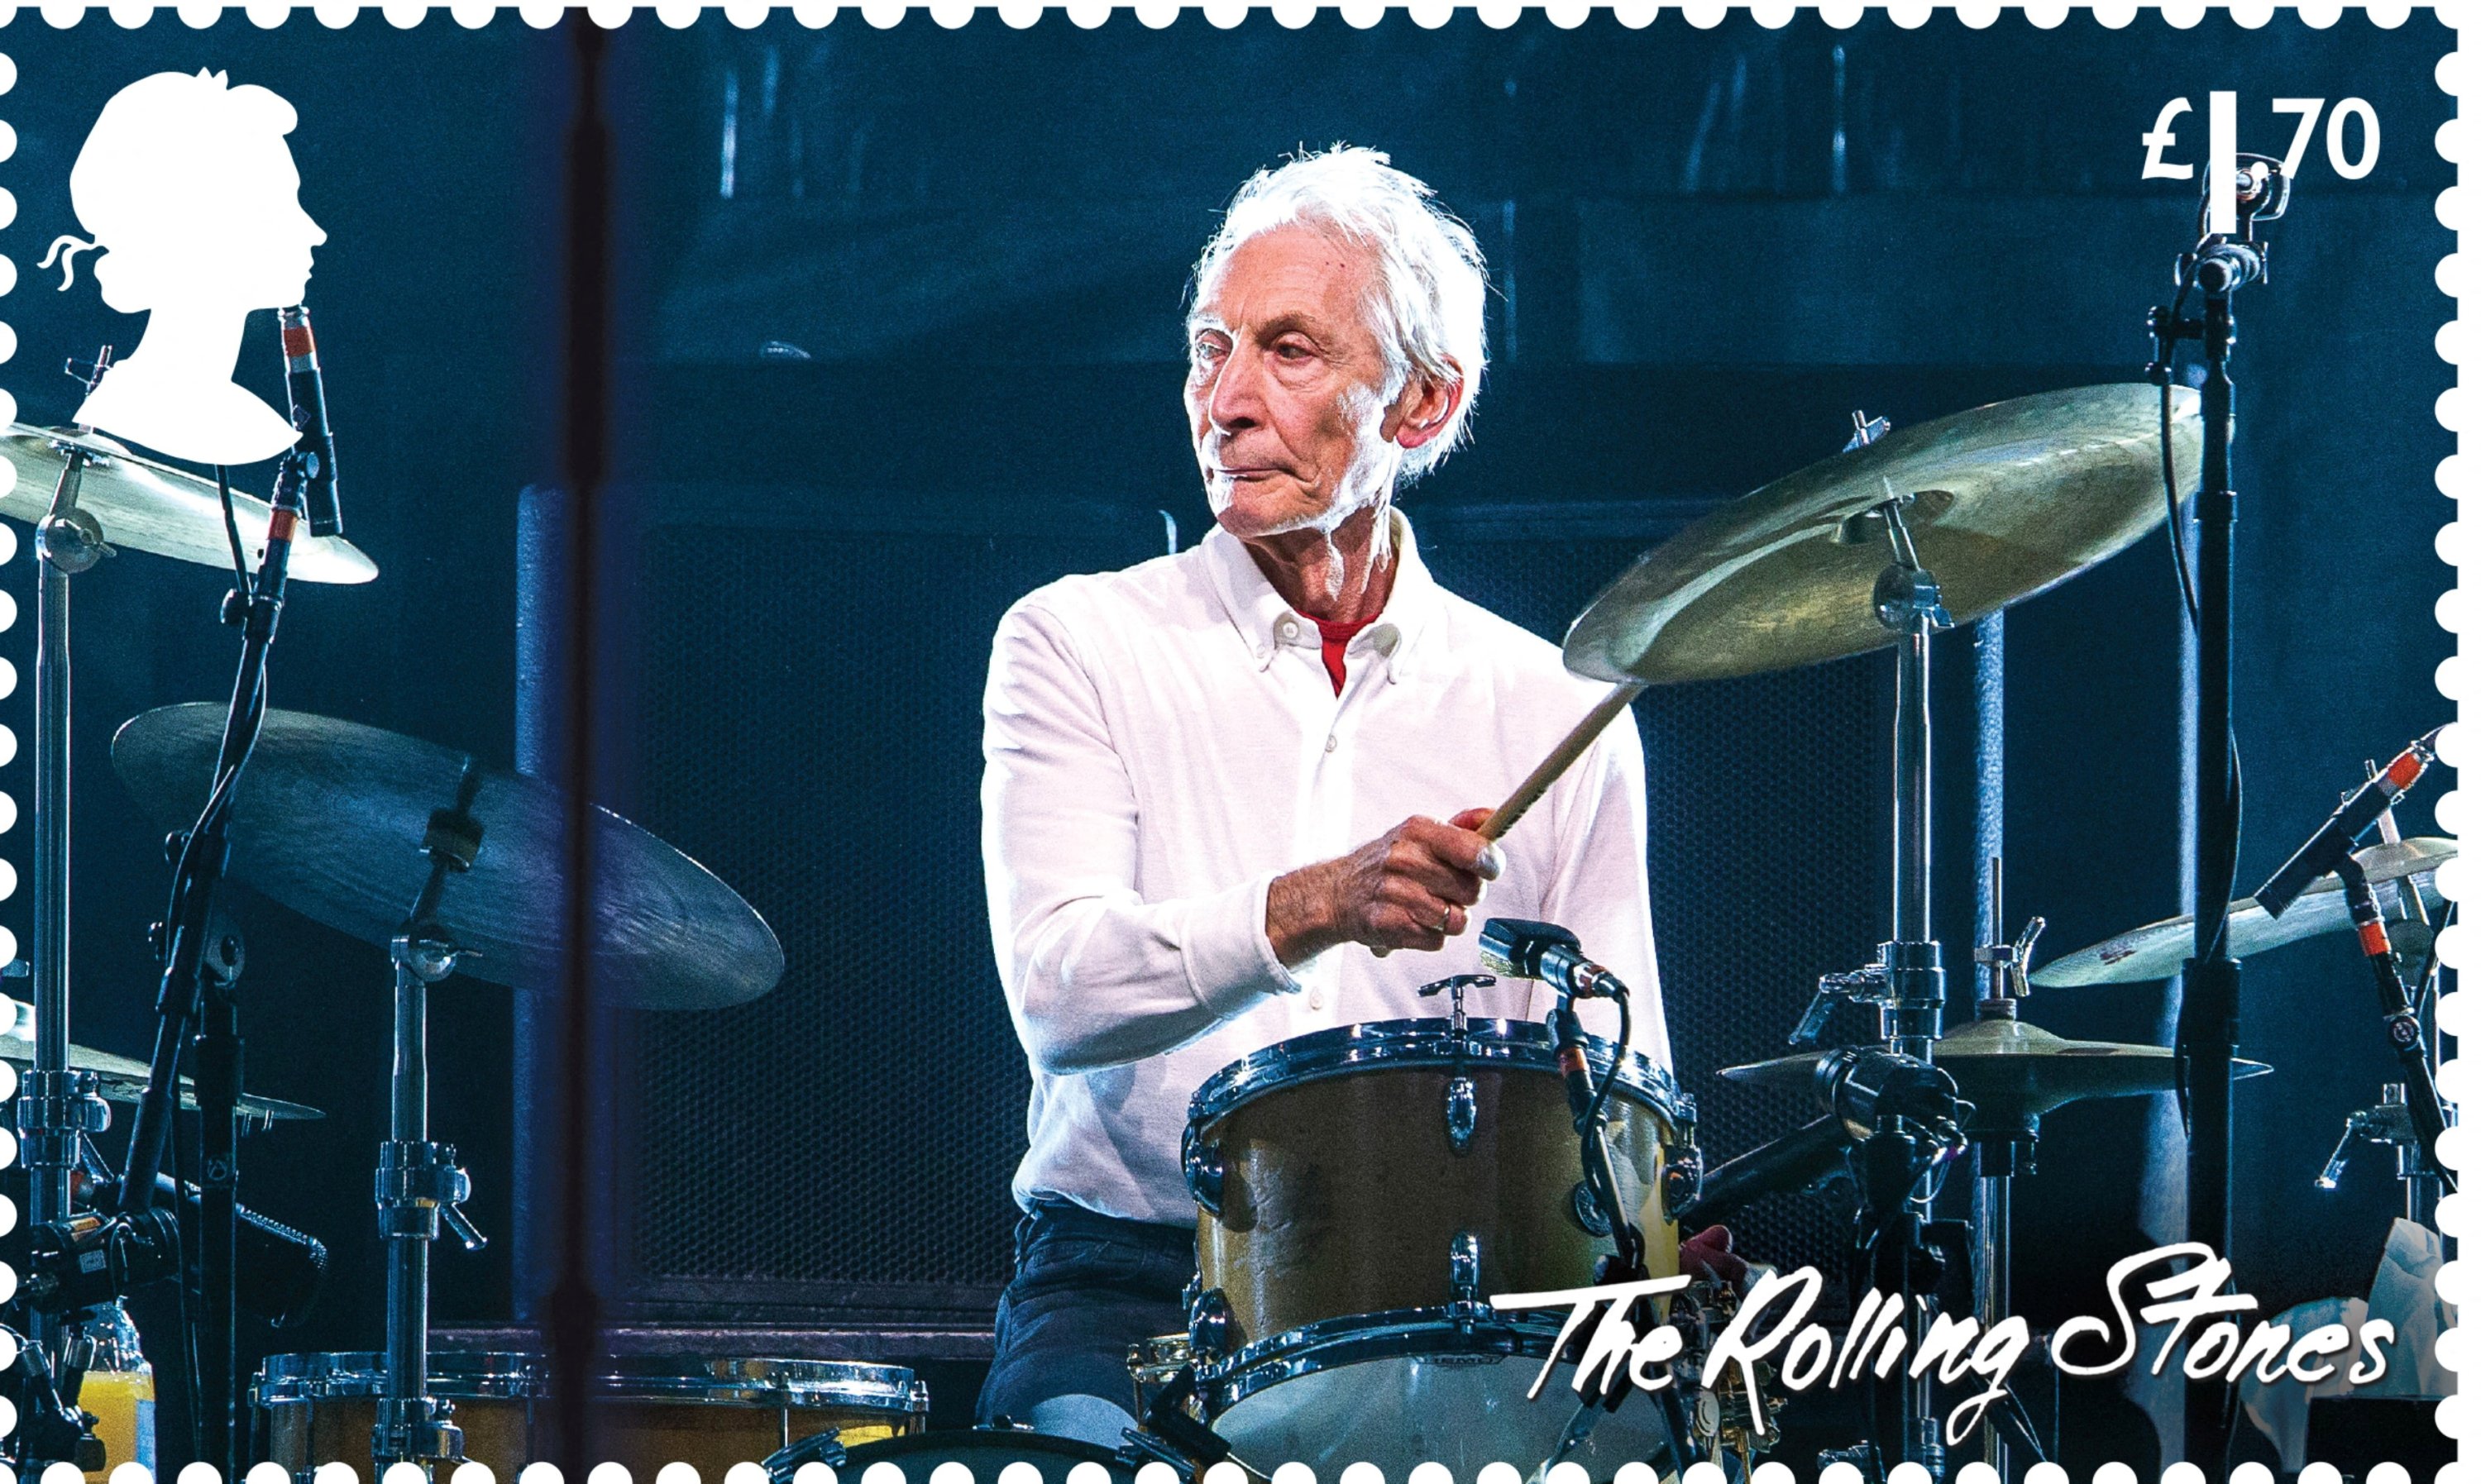 One of the dedicated Royal Mail stamps to honor 60 years of the legendary rock group The Rolling Stones is seen in this undated handout image. (REUTERS)